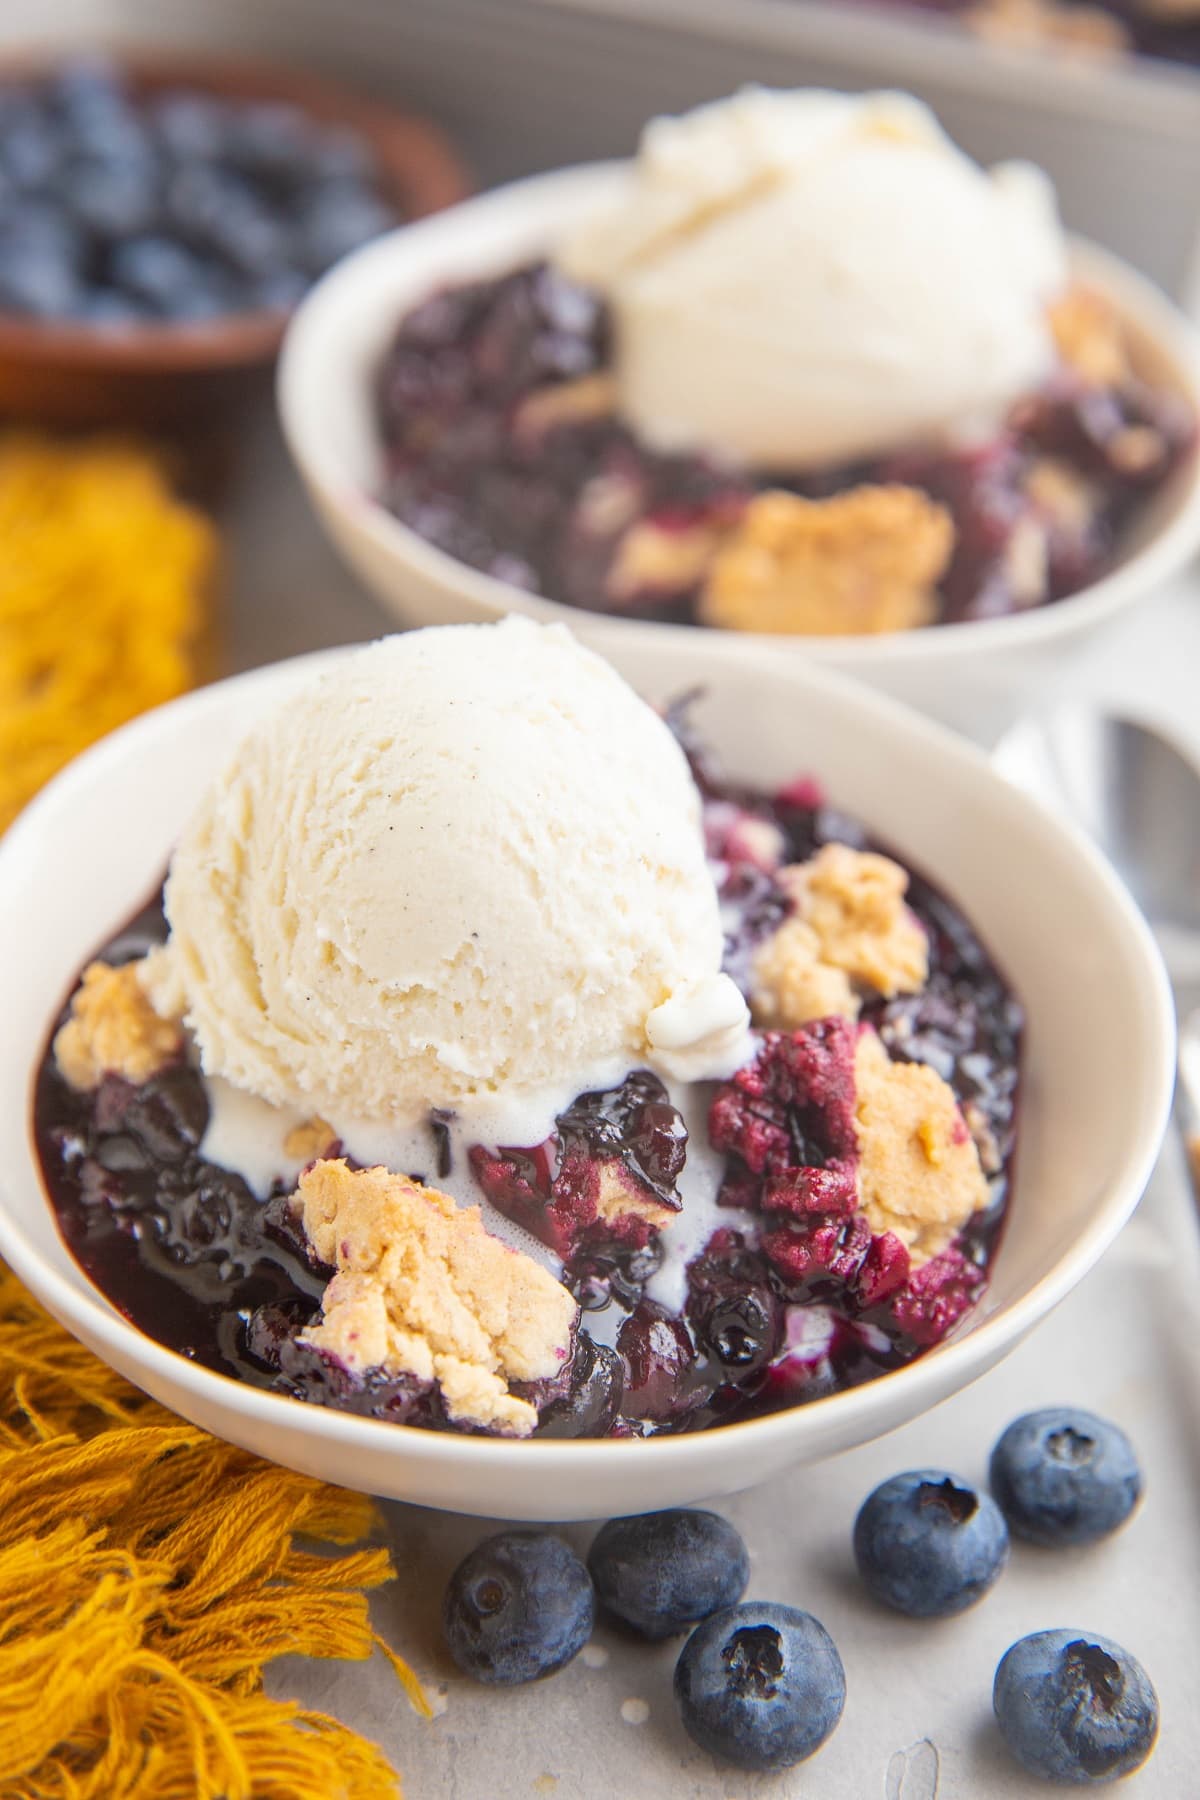 Two white bowls of blueberry cobbler with scoops of ice cream on top.